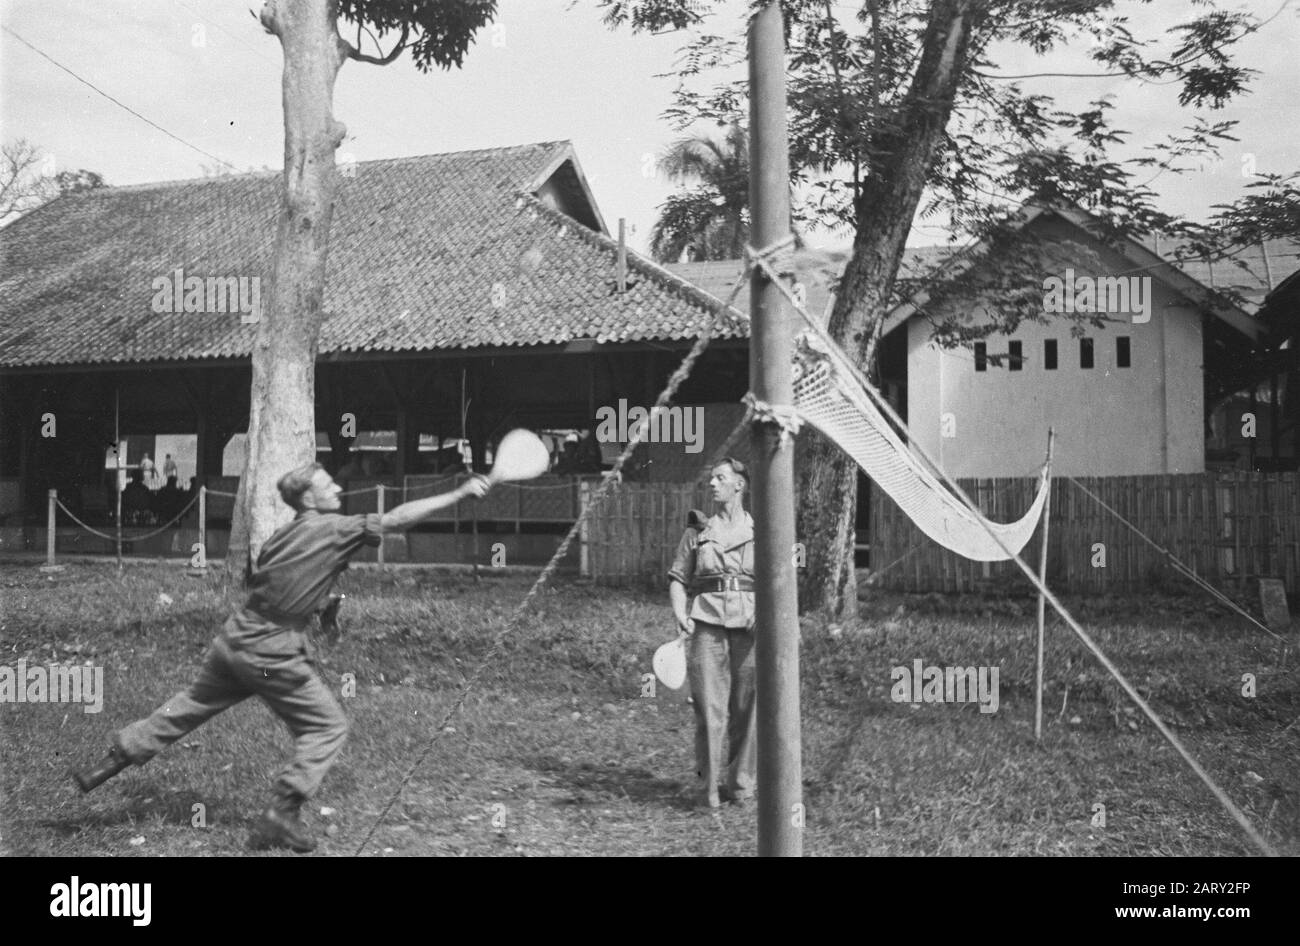 Sunday mood in Tjianjjoer  [two soldiers play a kind of badminton with bats] Date: July 13, 1947 Location: Cianjur, Indonesia, Dutch East Indies Stock Photo